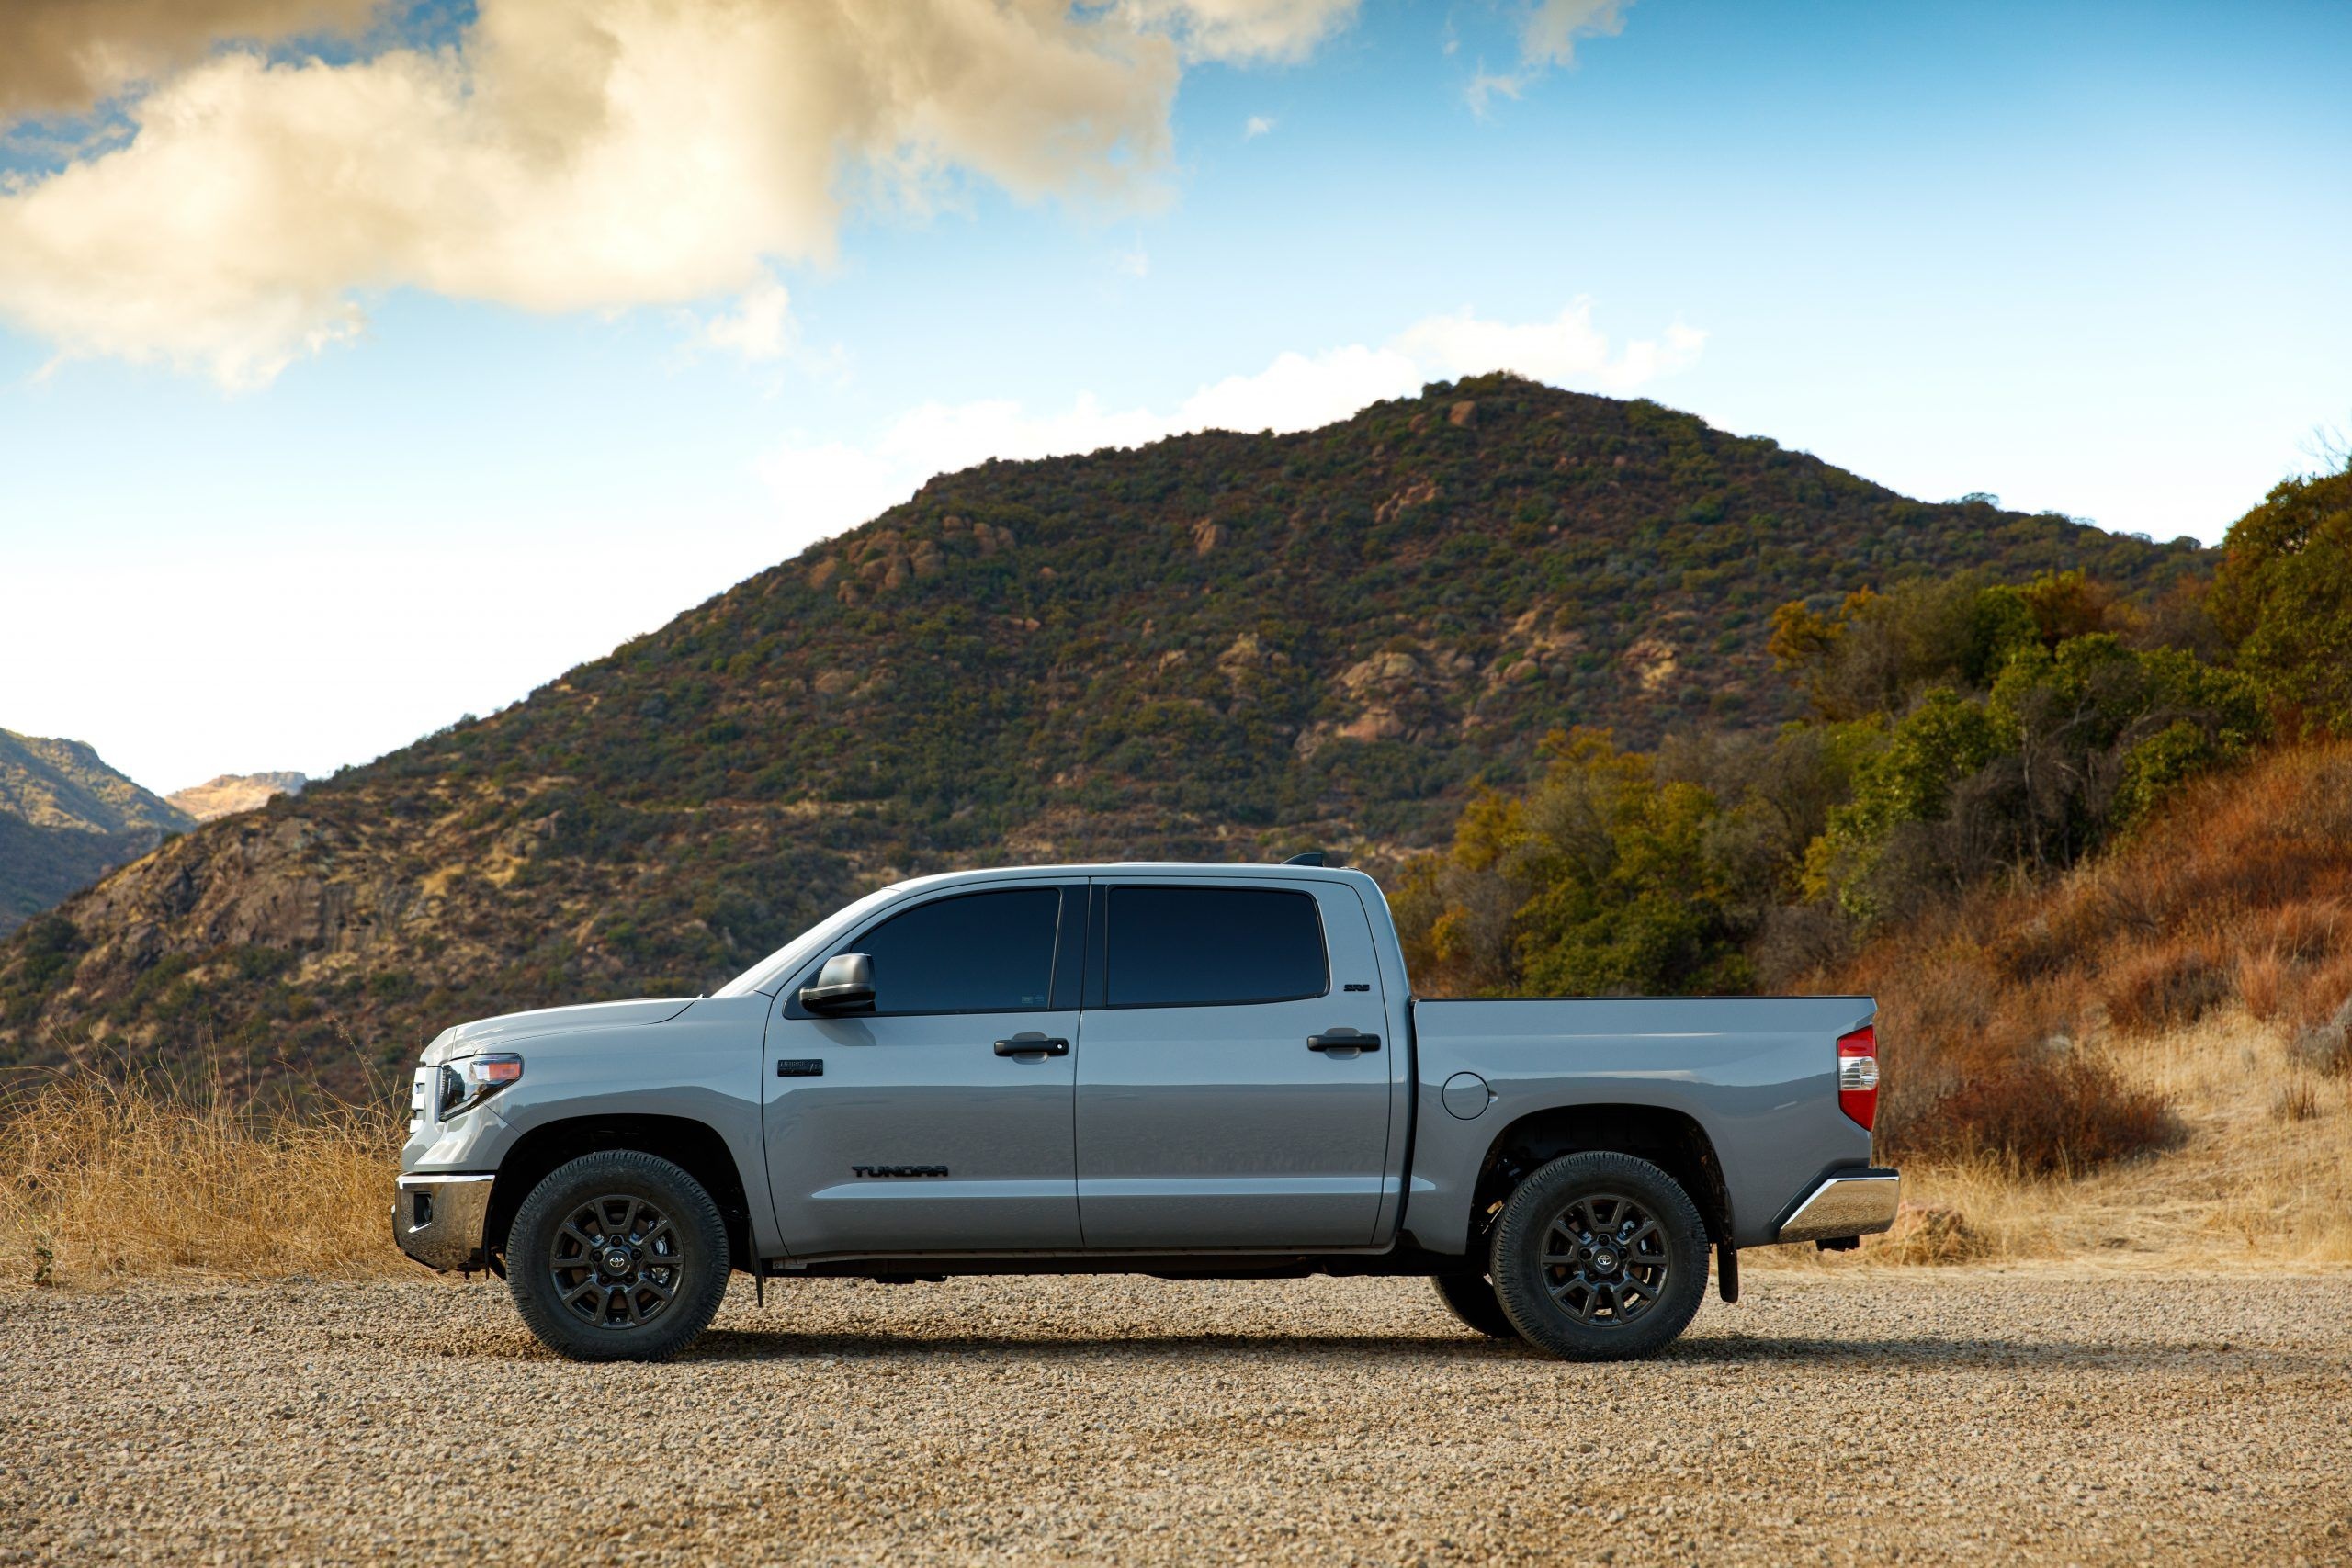 Toyota Tundra, Trail Edition, Off-road review, Truck features, 2560x1710 HD Desktop